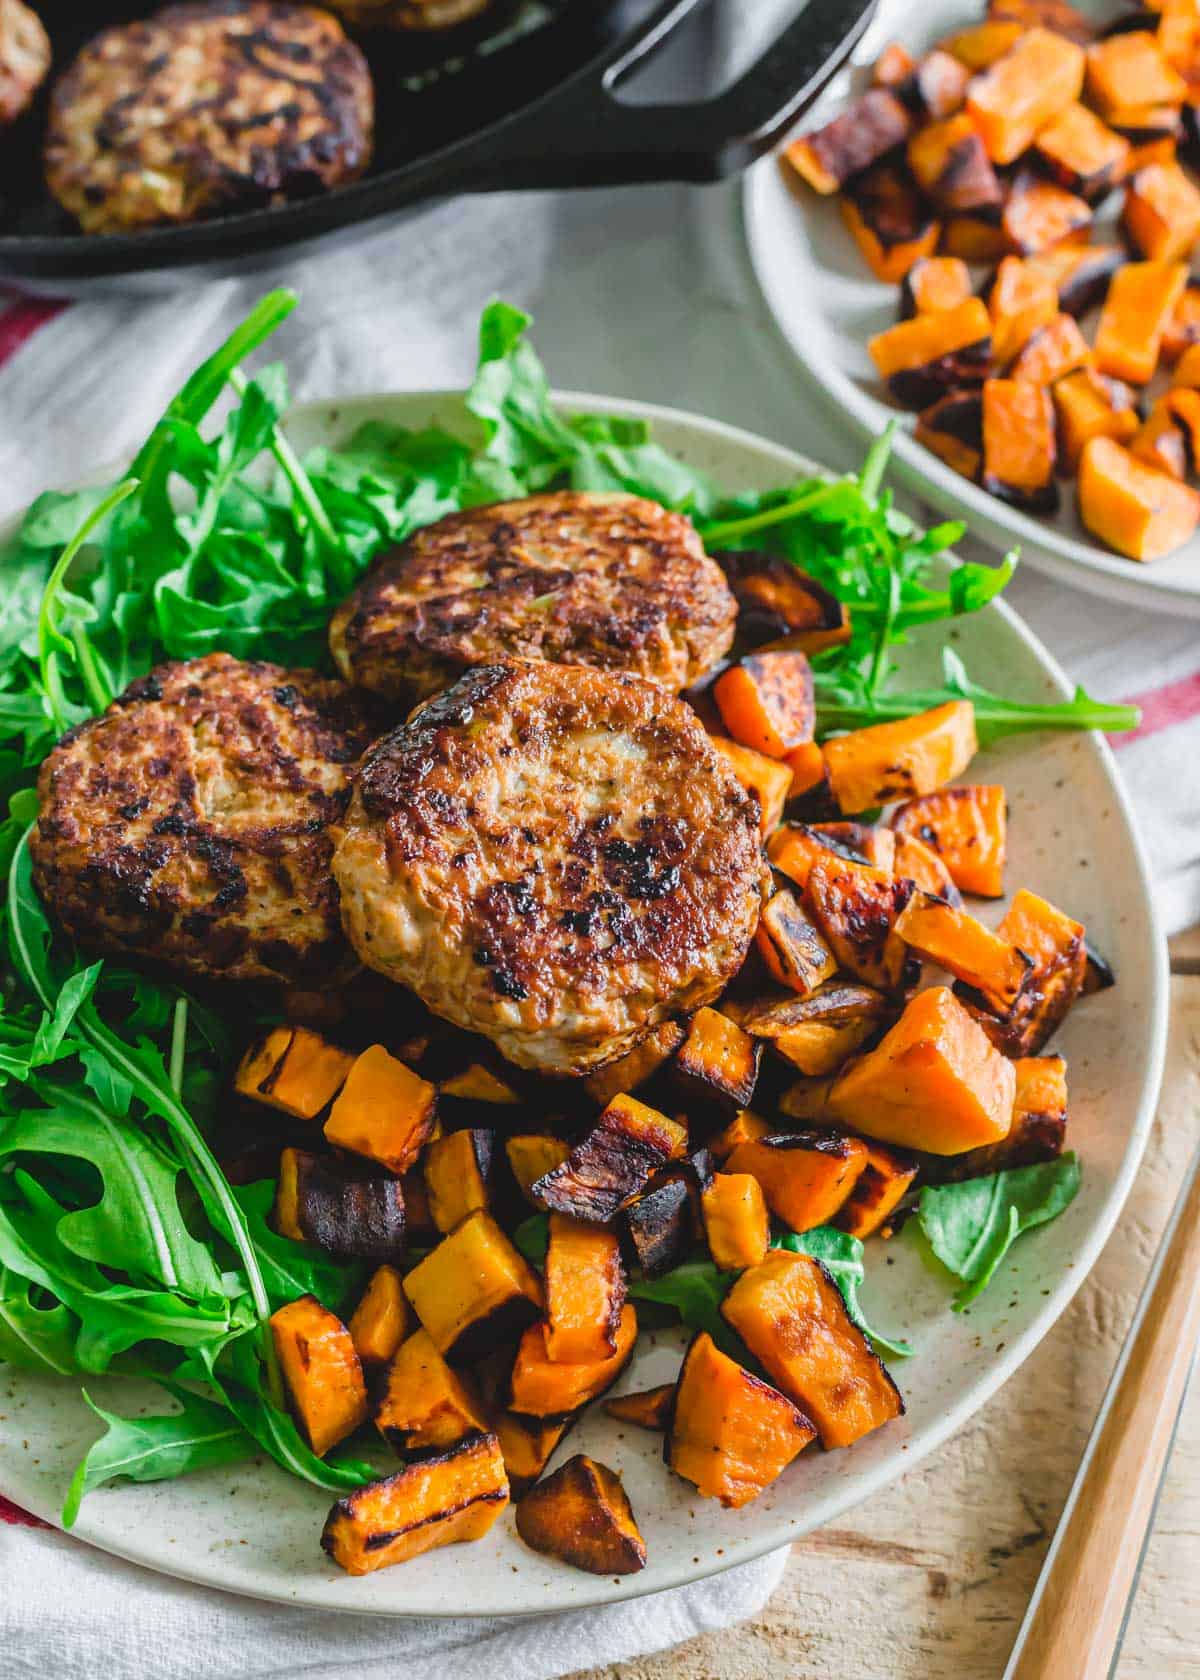 Homemade ground chicken sausage patties served with skillet sweet potatoes and arugula.